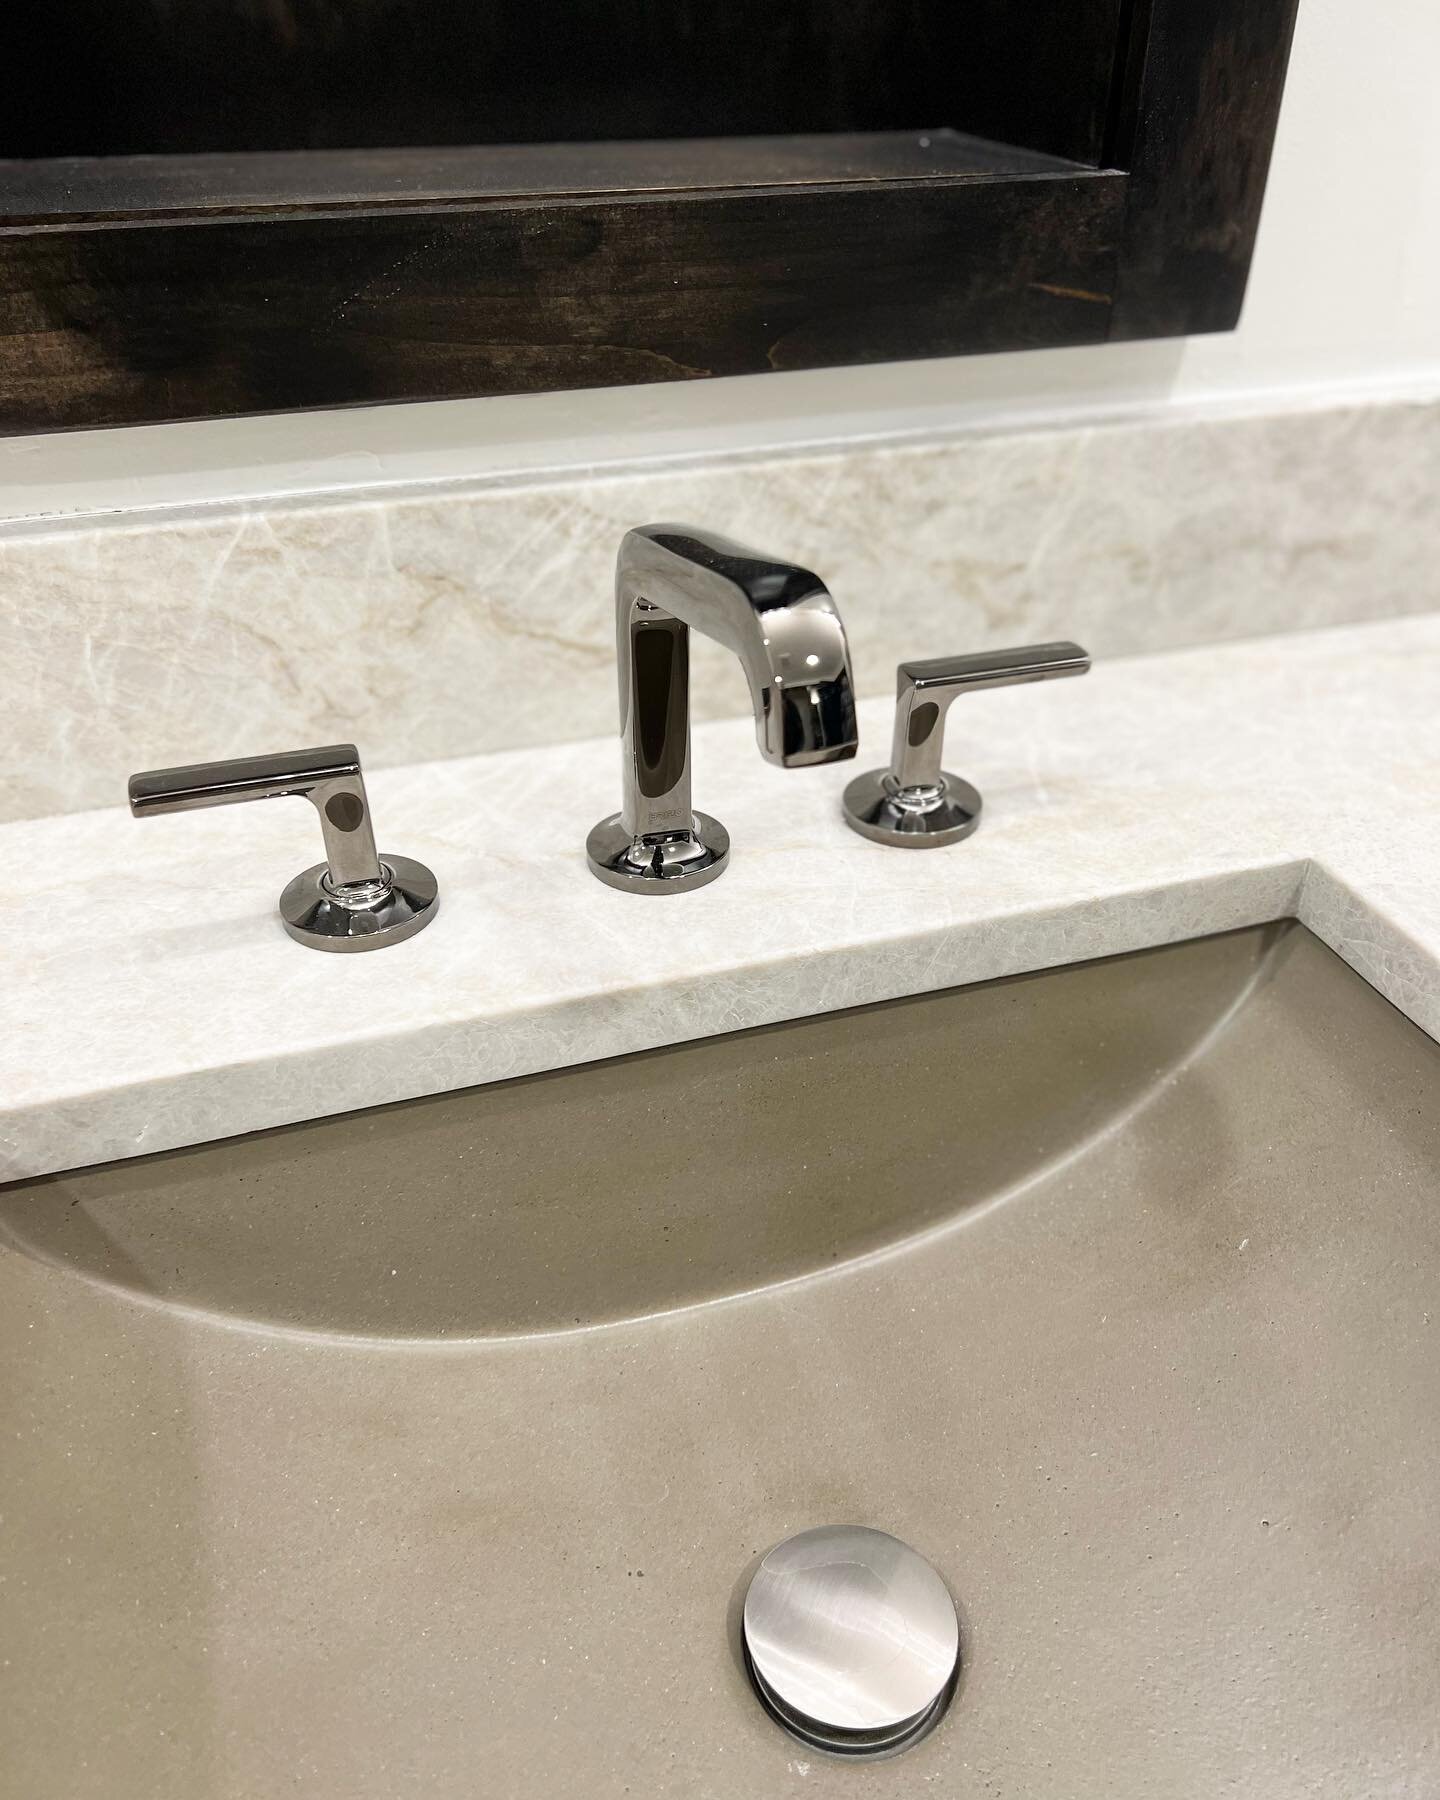 Counter, faucet sink combo.  Finalizing this renovation and going through the details.  #ibddesignstudio